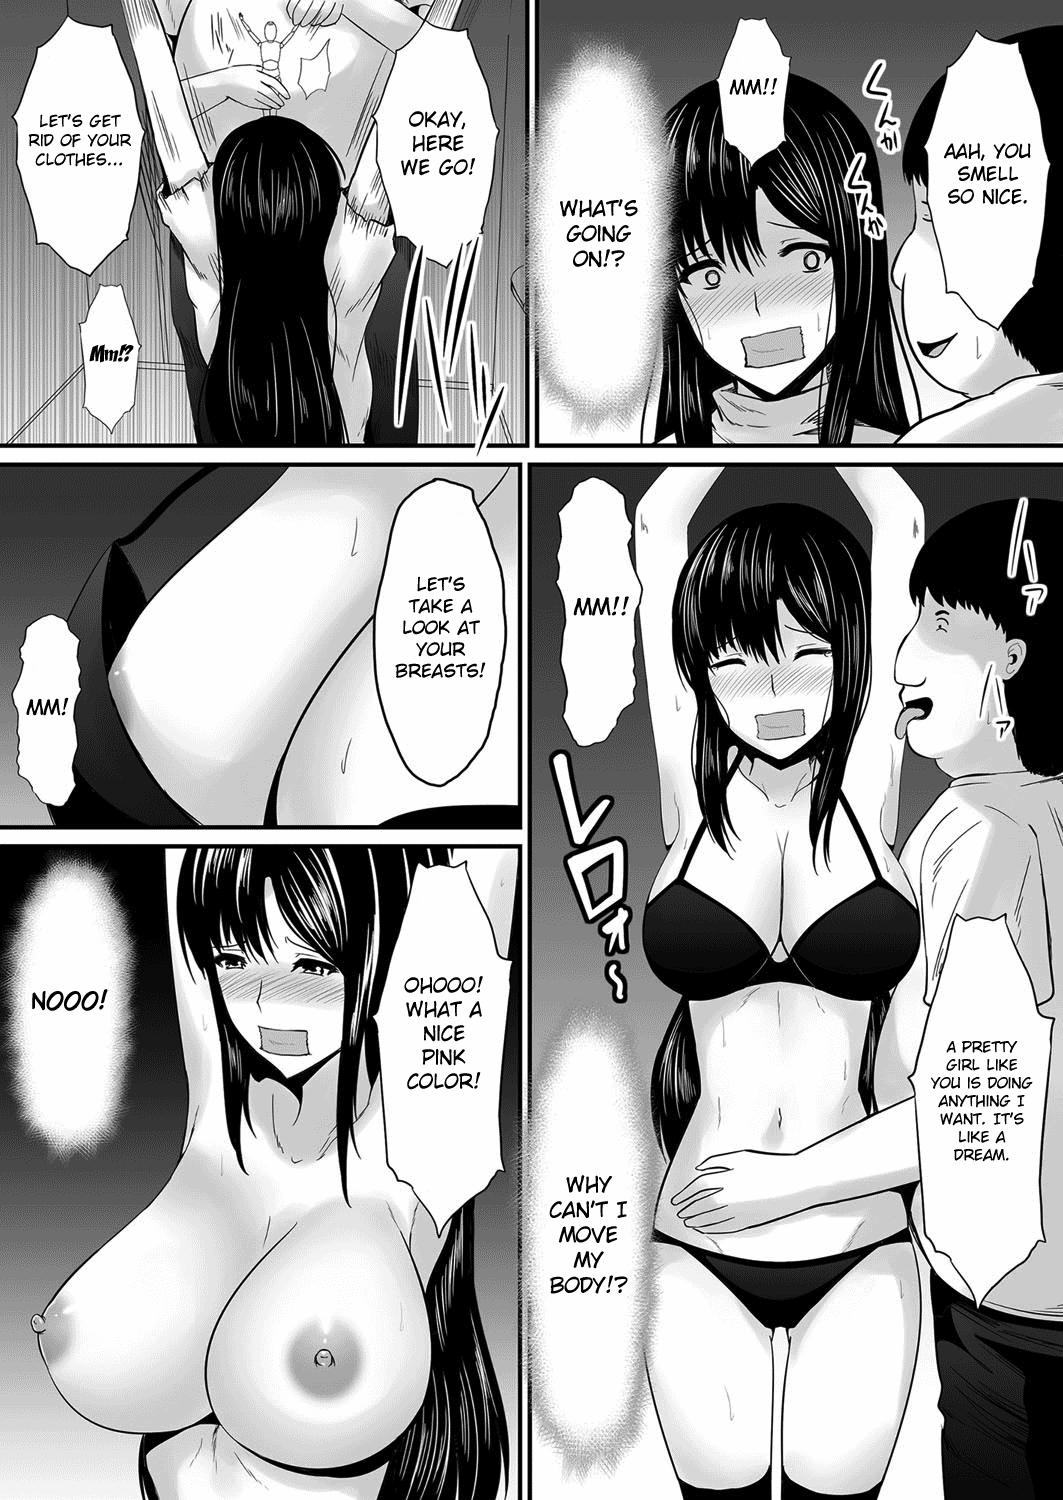 Amatuer Ecchi na Hatsumei de... Mechakucha Sex Shitemita! 2 | I Used Perverted Inventions... To Have Crazy Sex! 2 Behind - Page 13